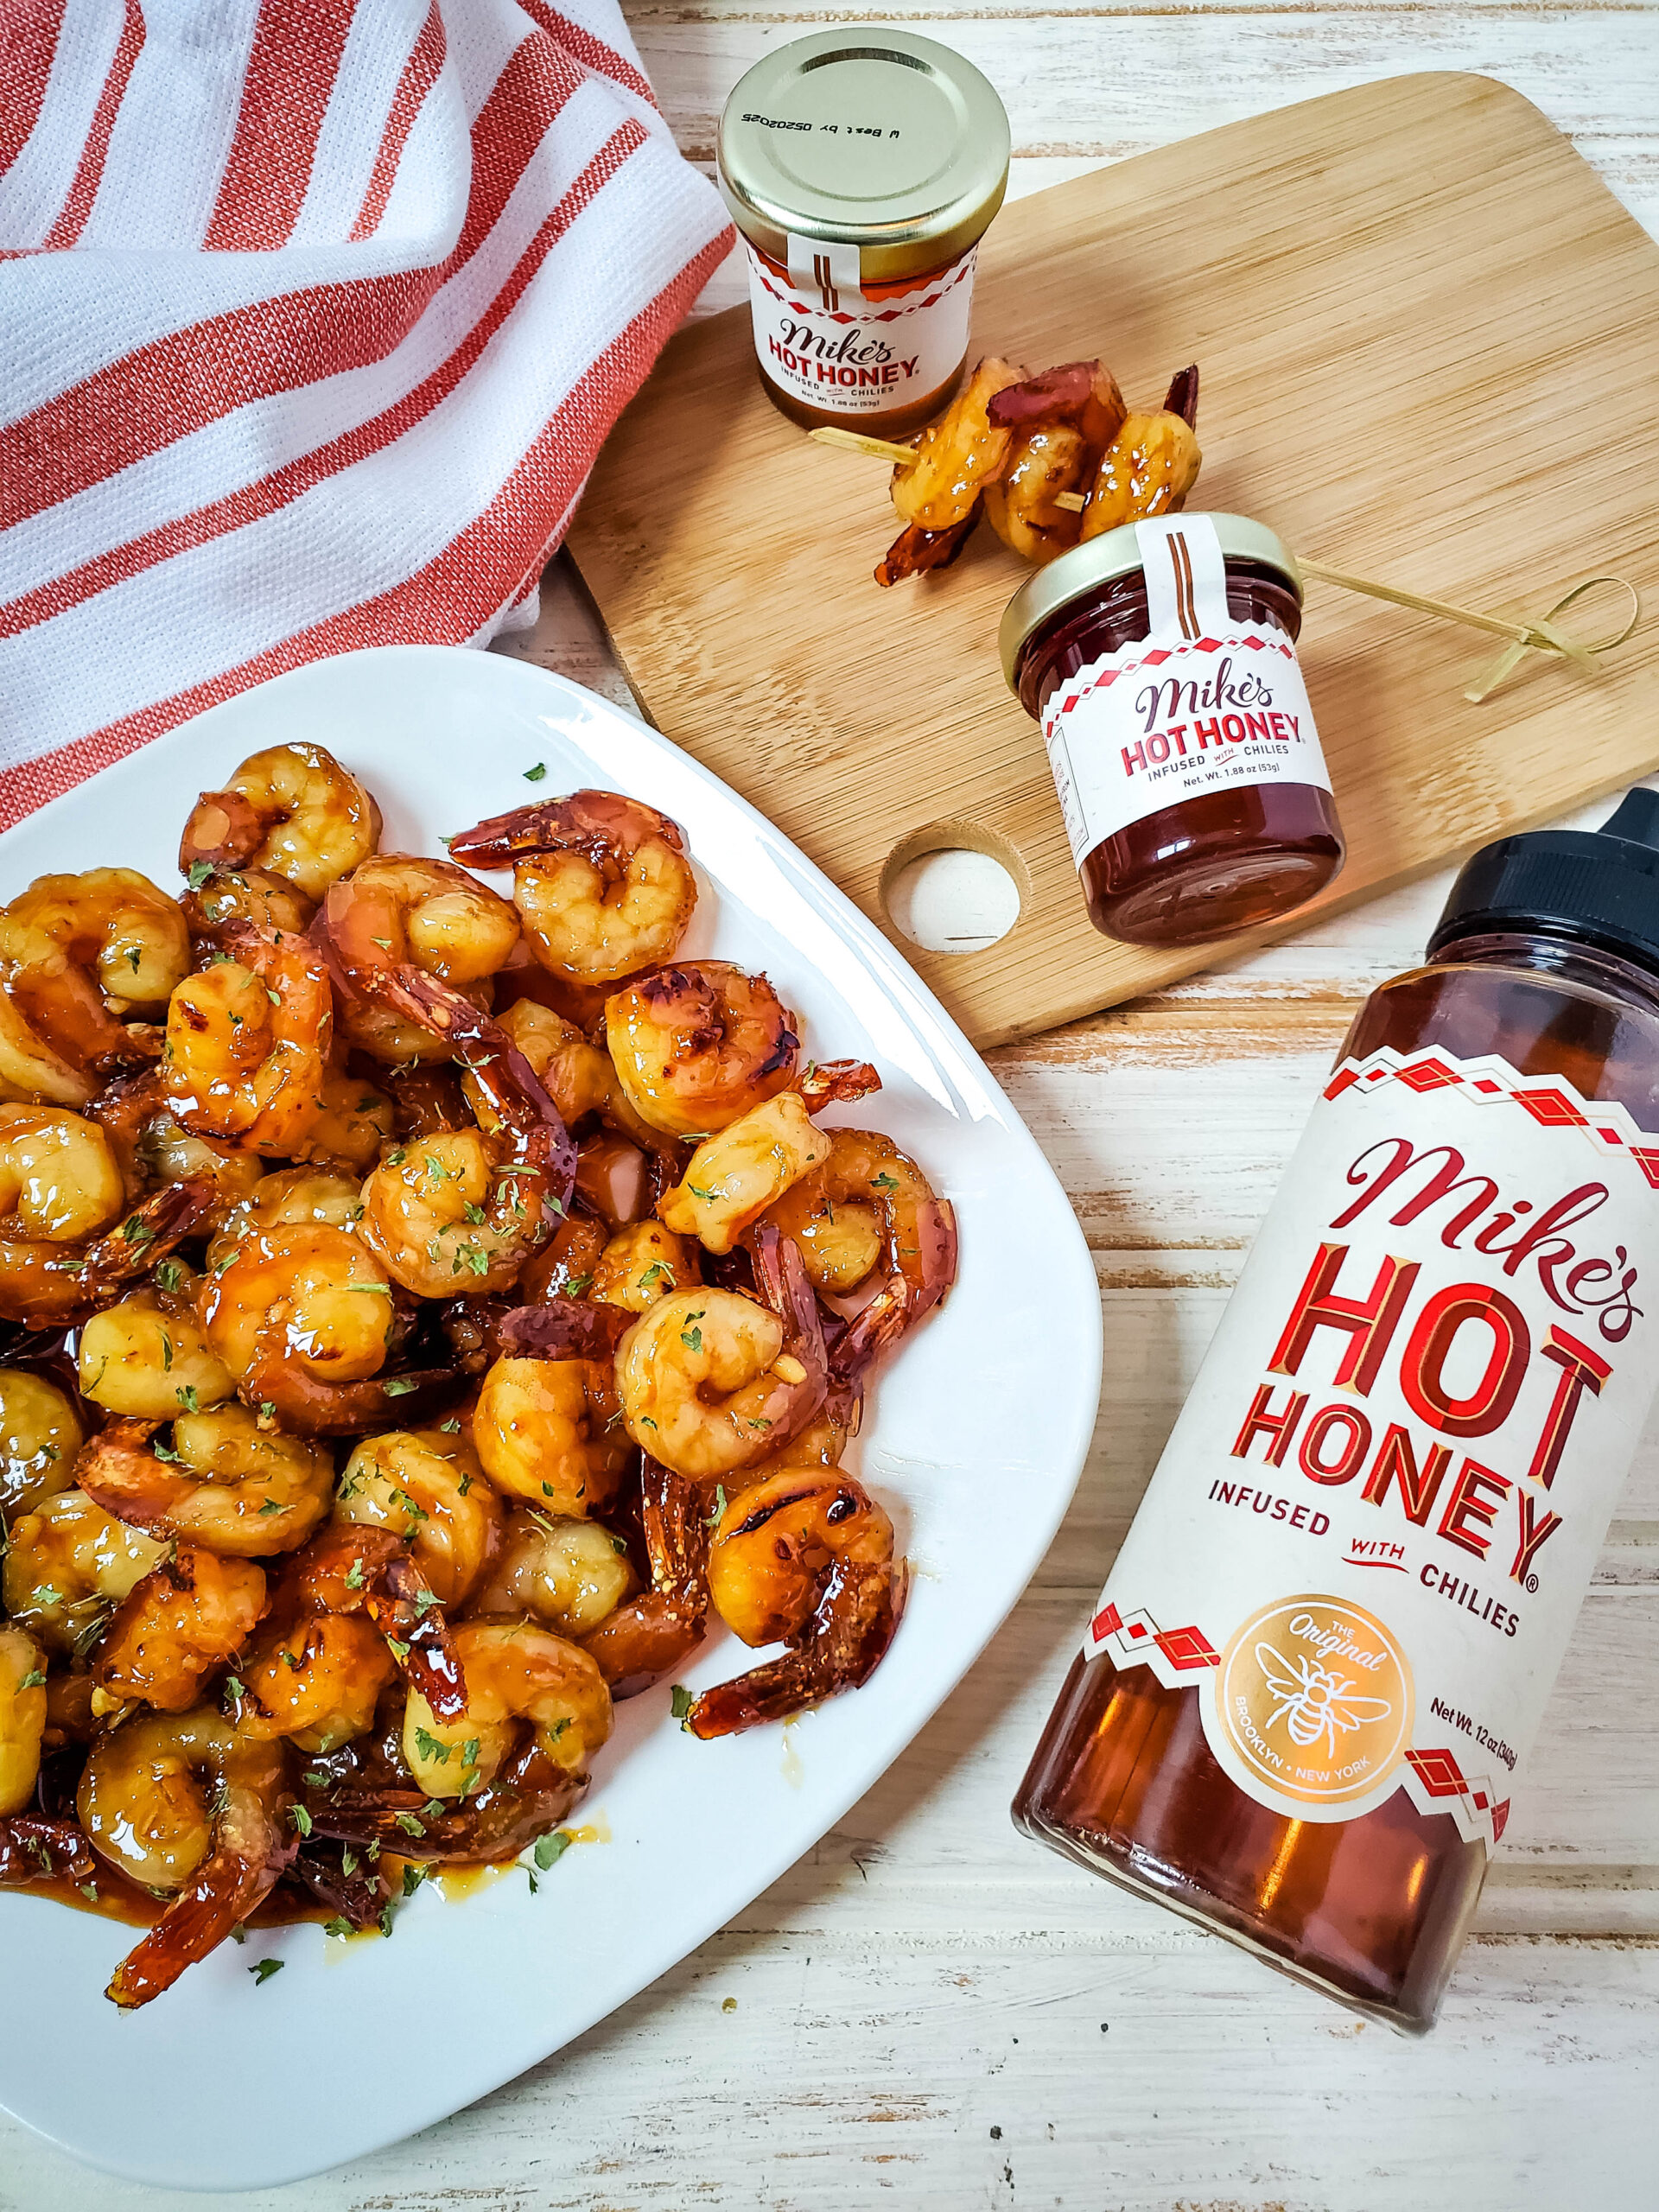 This spicy honey garlic shrimp recipe is quick, easy and absolutely delicious! Serve these shrimp with rice and a vegetable, or serve alone as an appetizer.